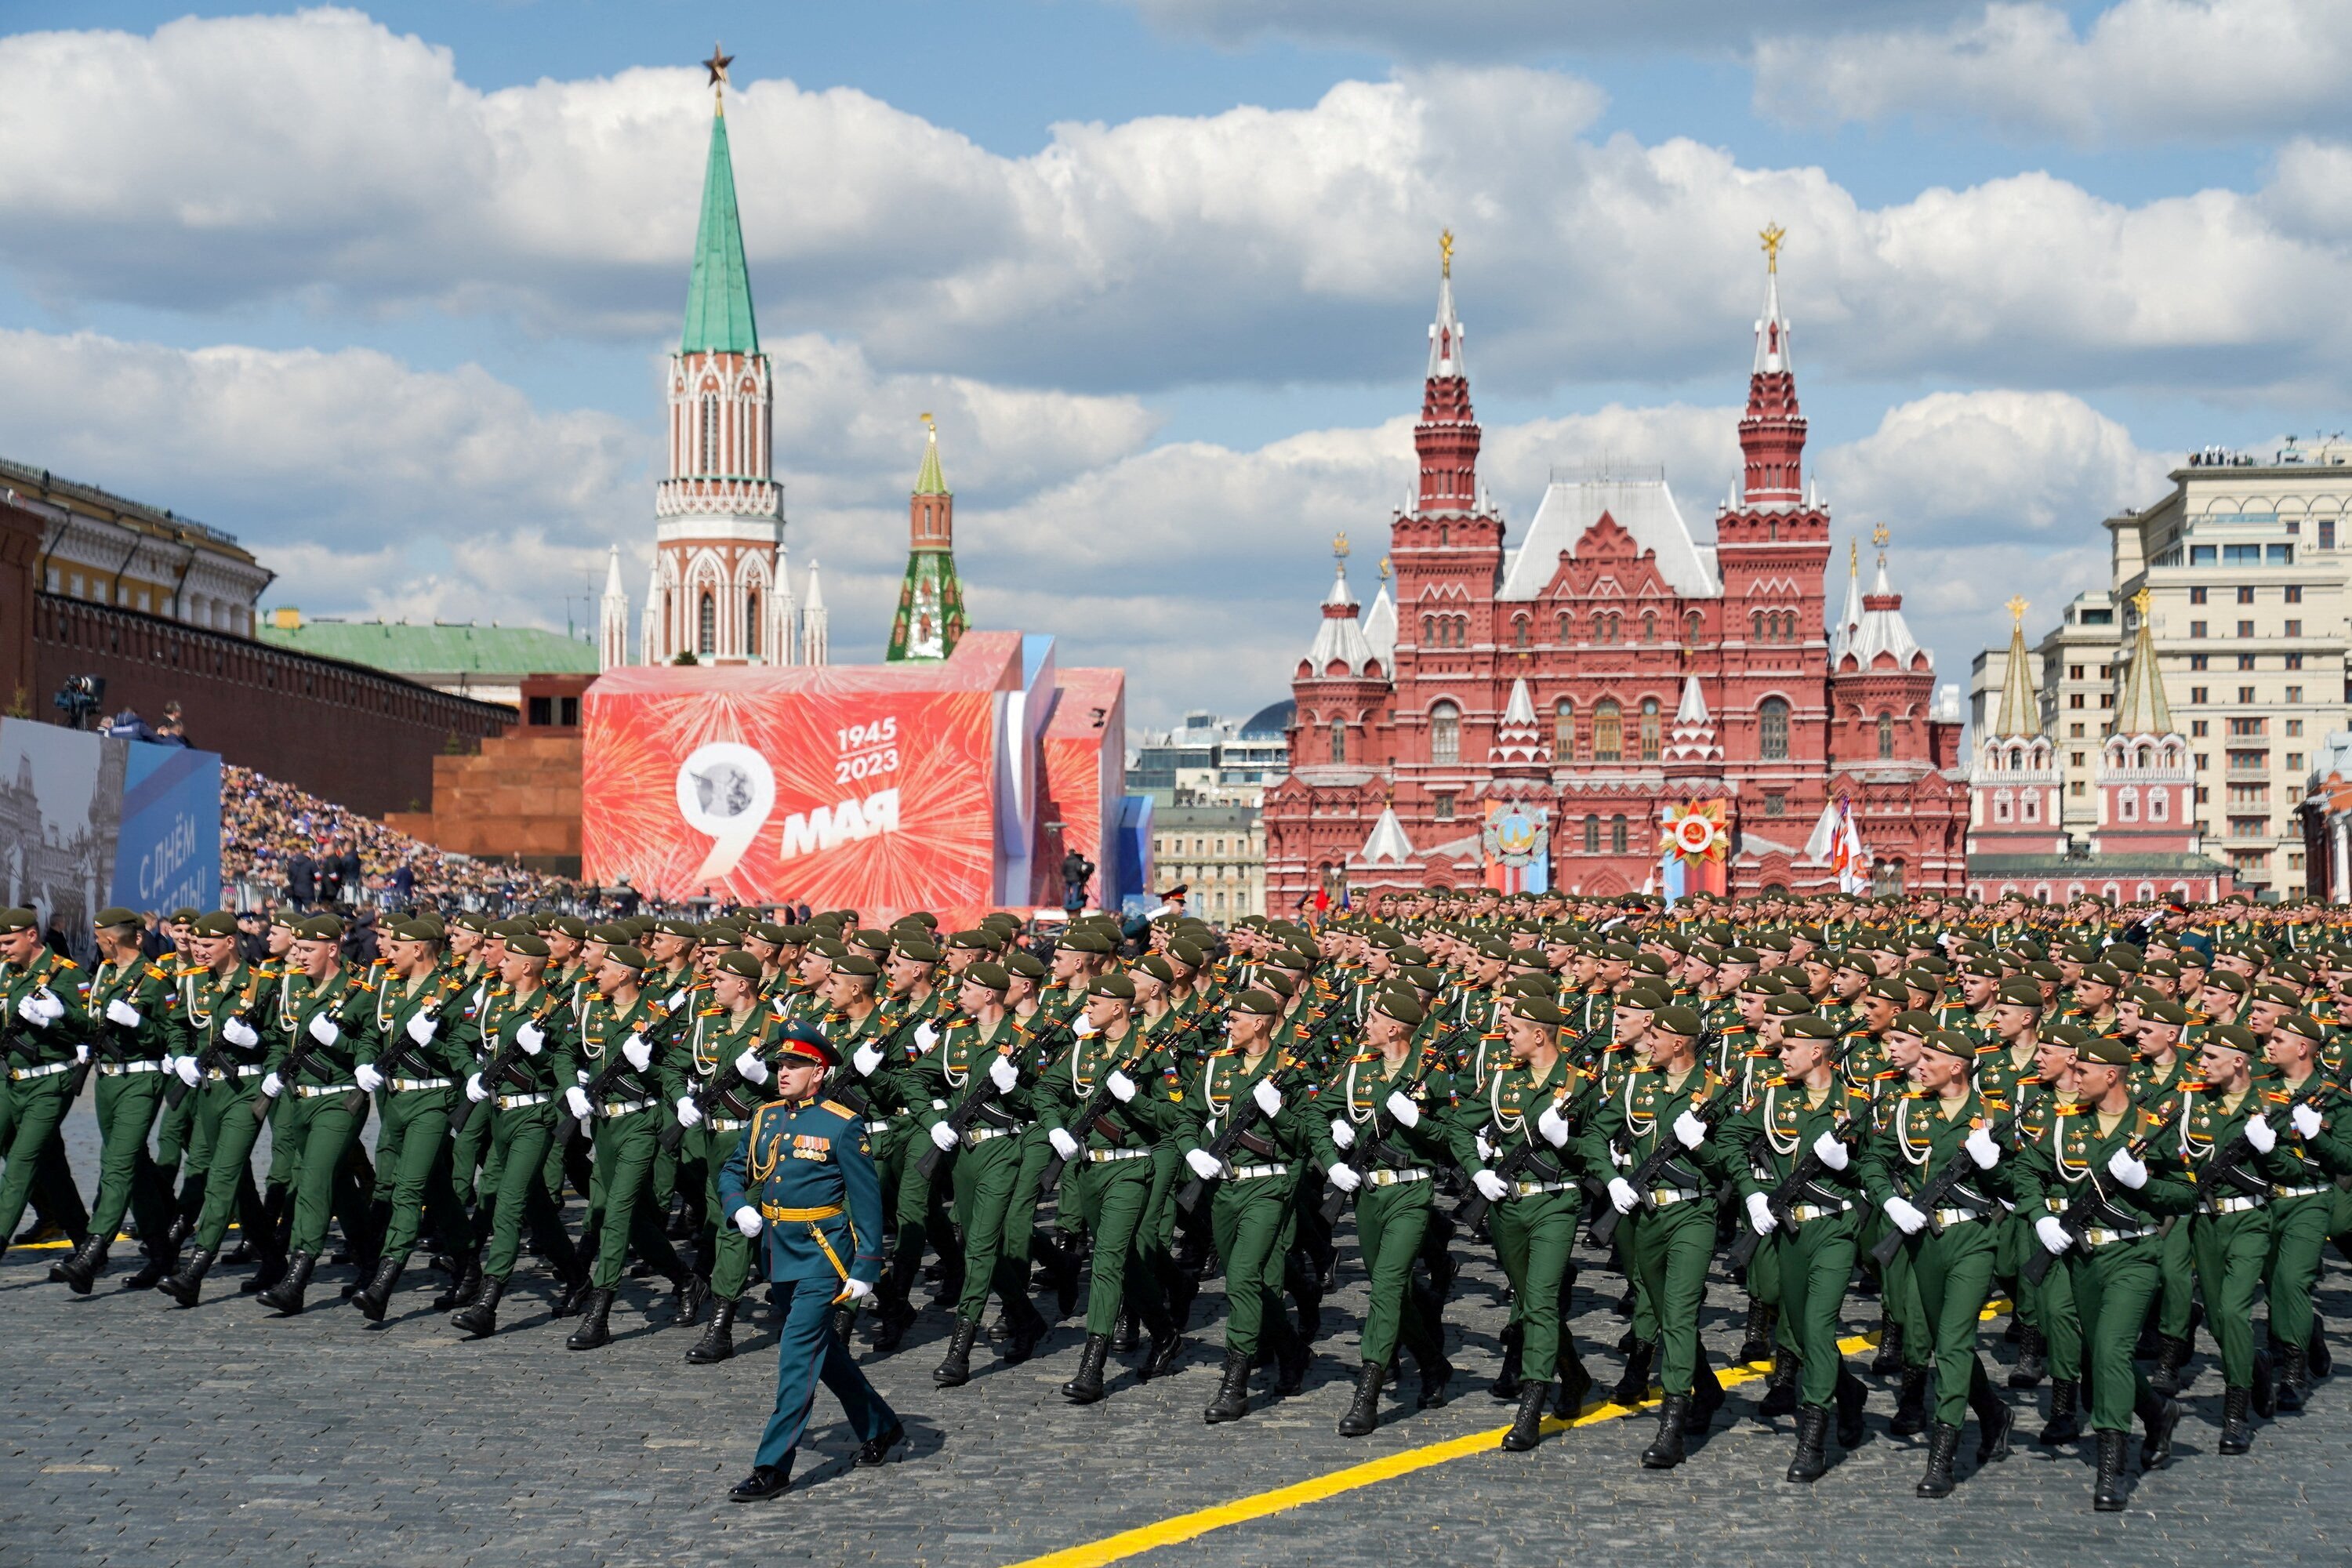 Russian service members take part in a military parade in Moscow’s Red Square in May. Photo: Moscow News Agency via Reuters